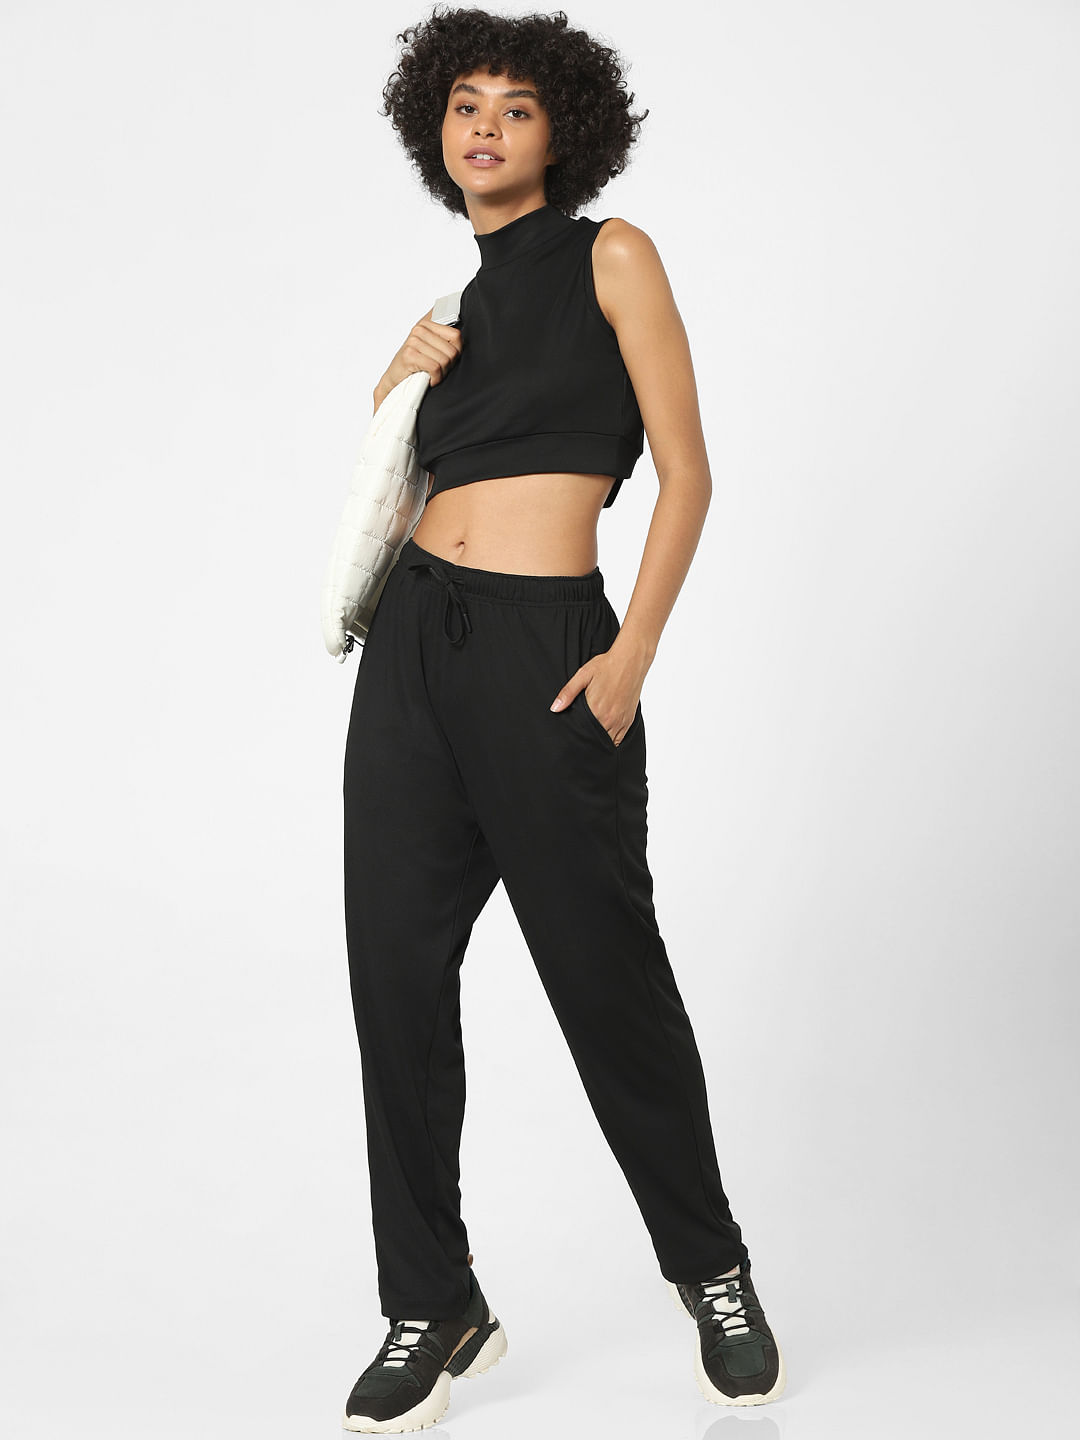 discount 63% WOMEN FASHION Trousers Wide-leg Black M H&M tracksuit and joggers 